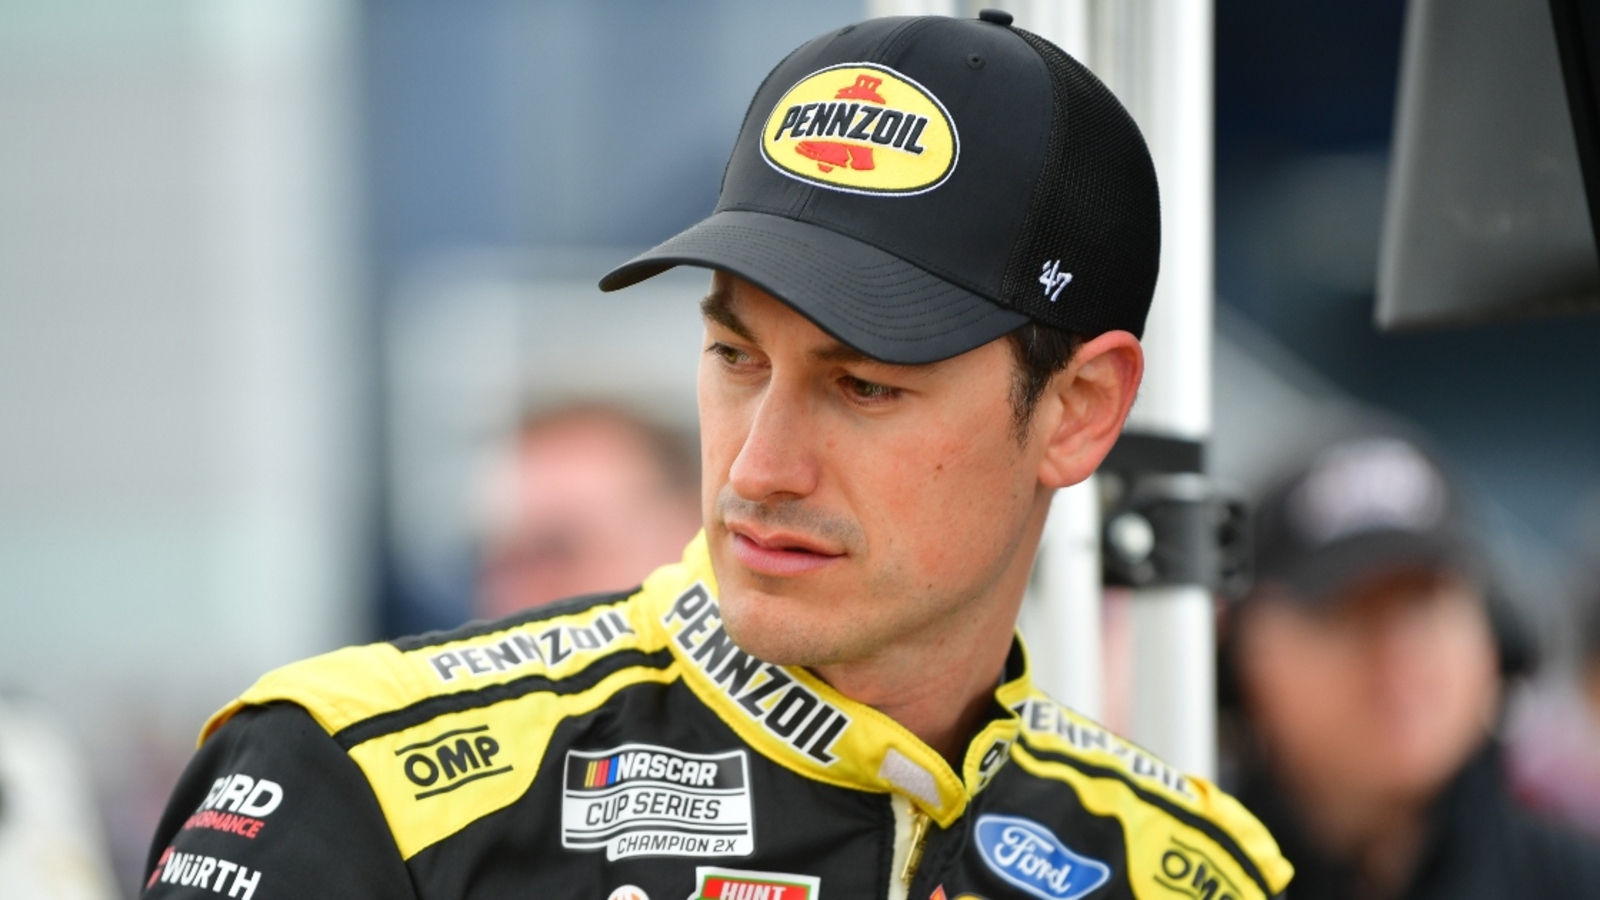 Joey Logano is happy to ‘move on’ from ’embarrassing’ glove penalty